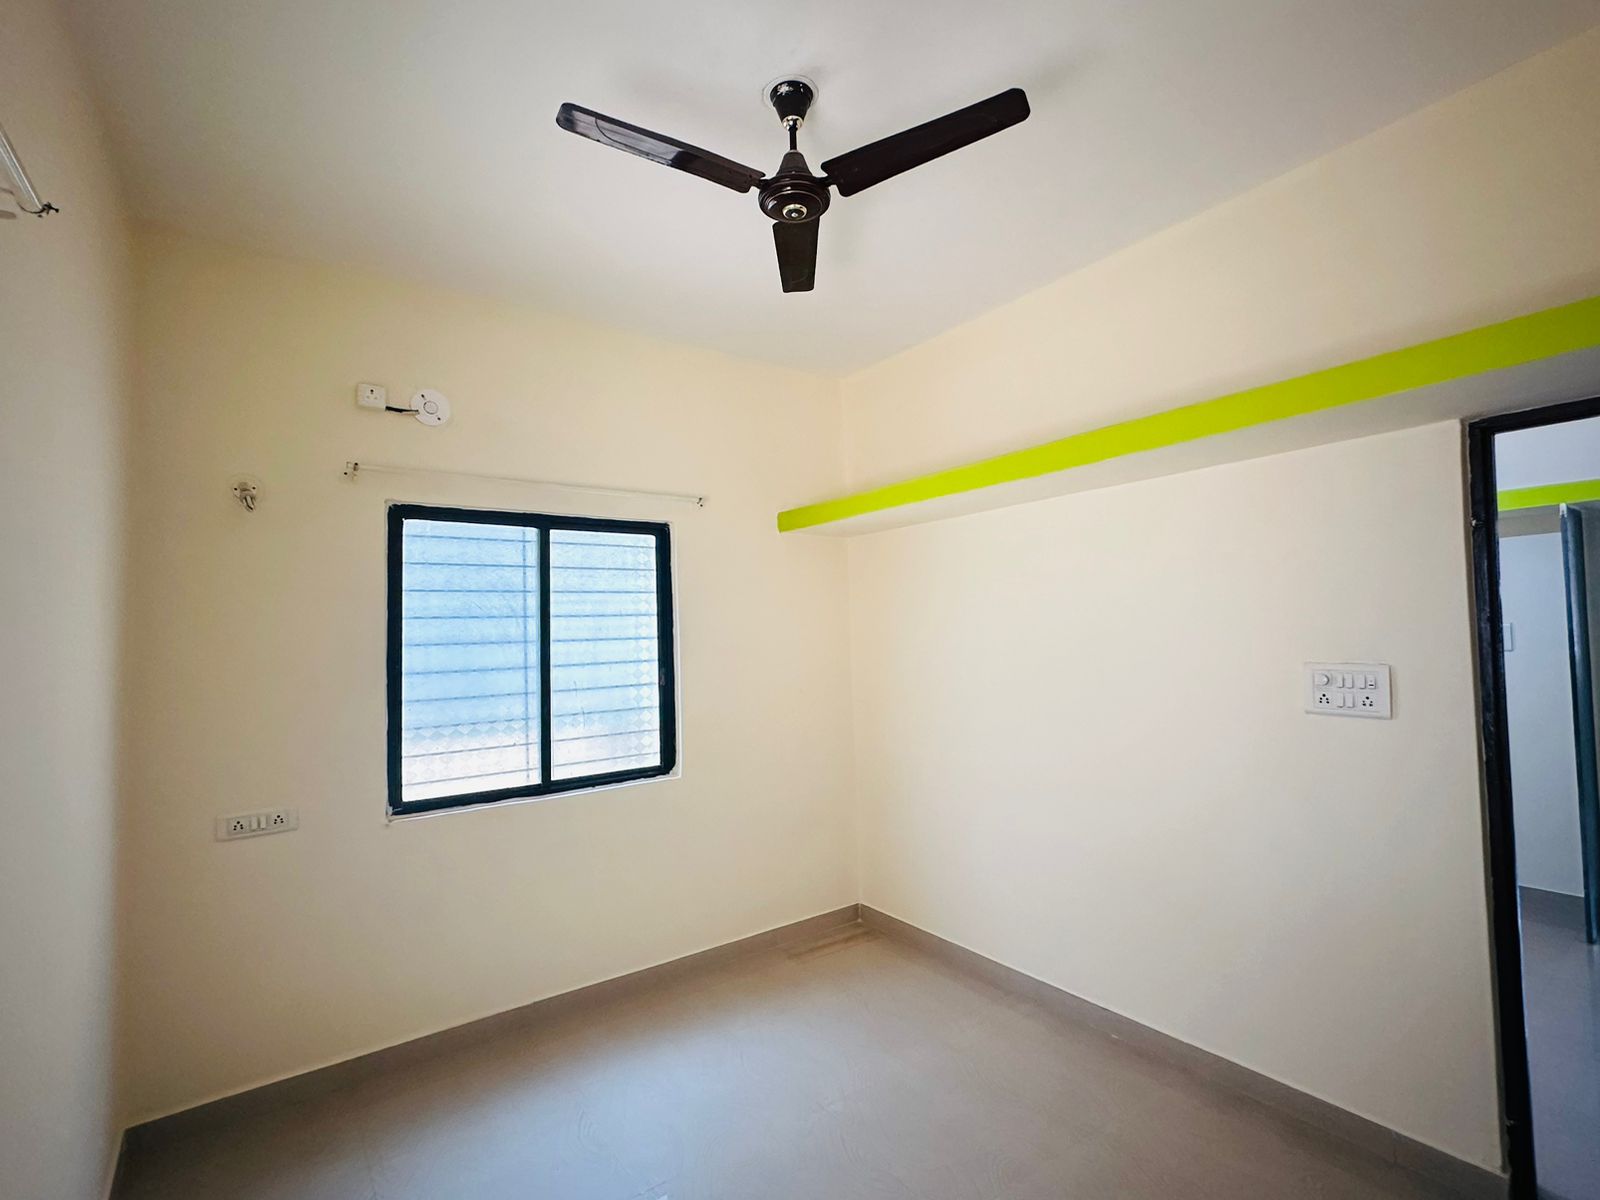 2 BHK Residential Apartment for Rent Only in Vadgaon Sheri